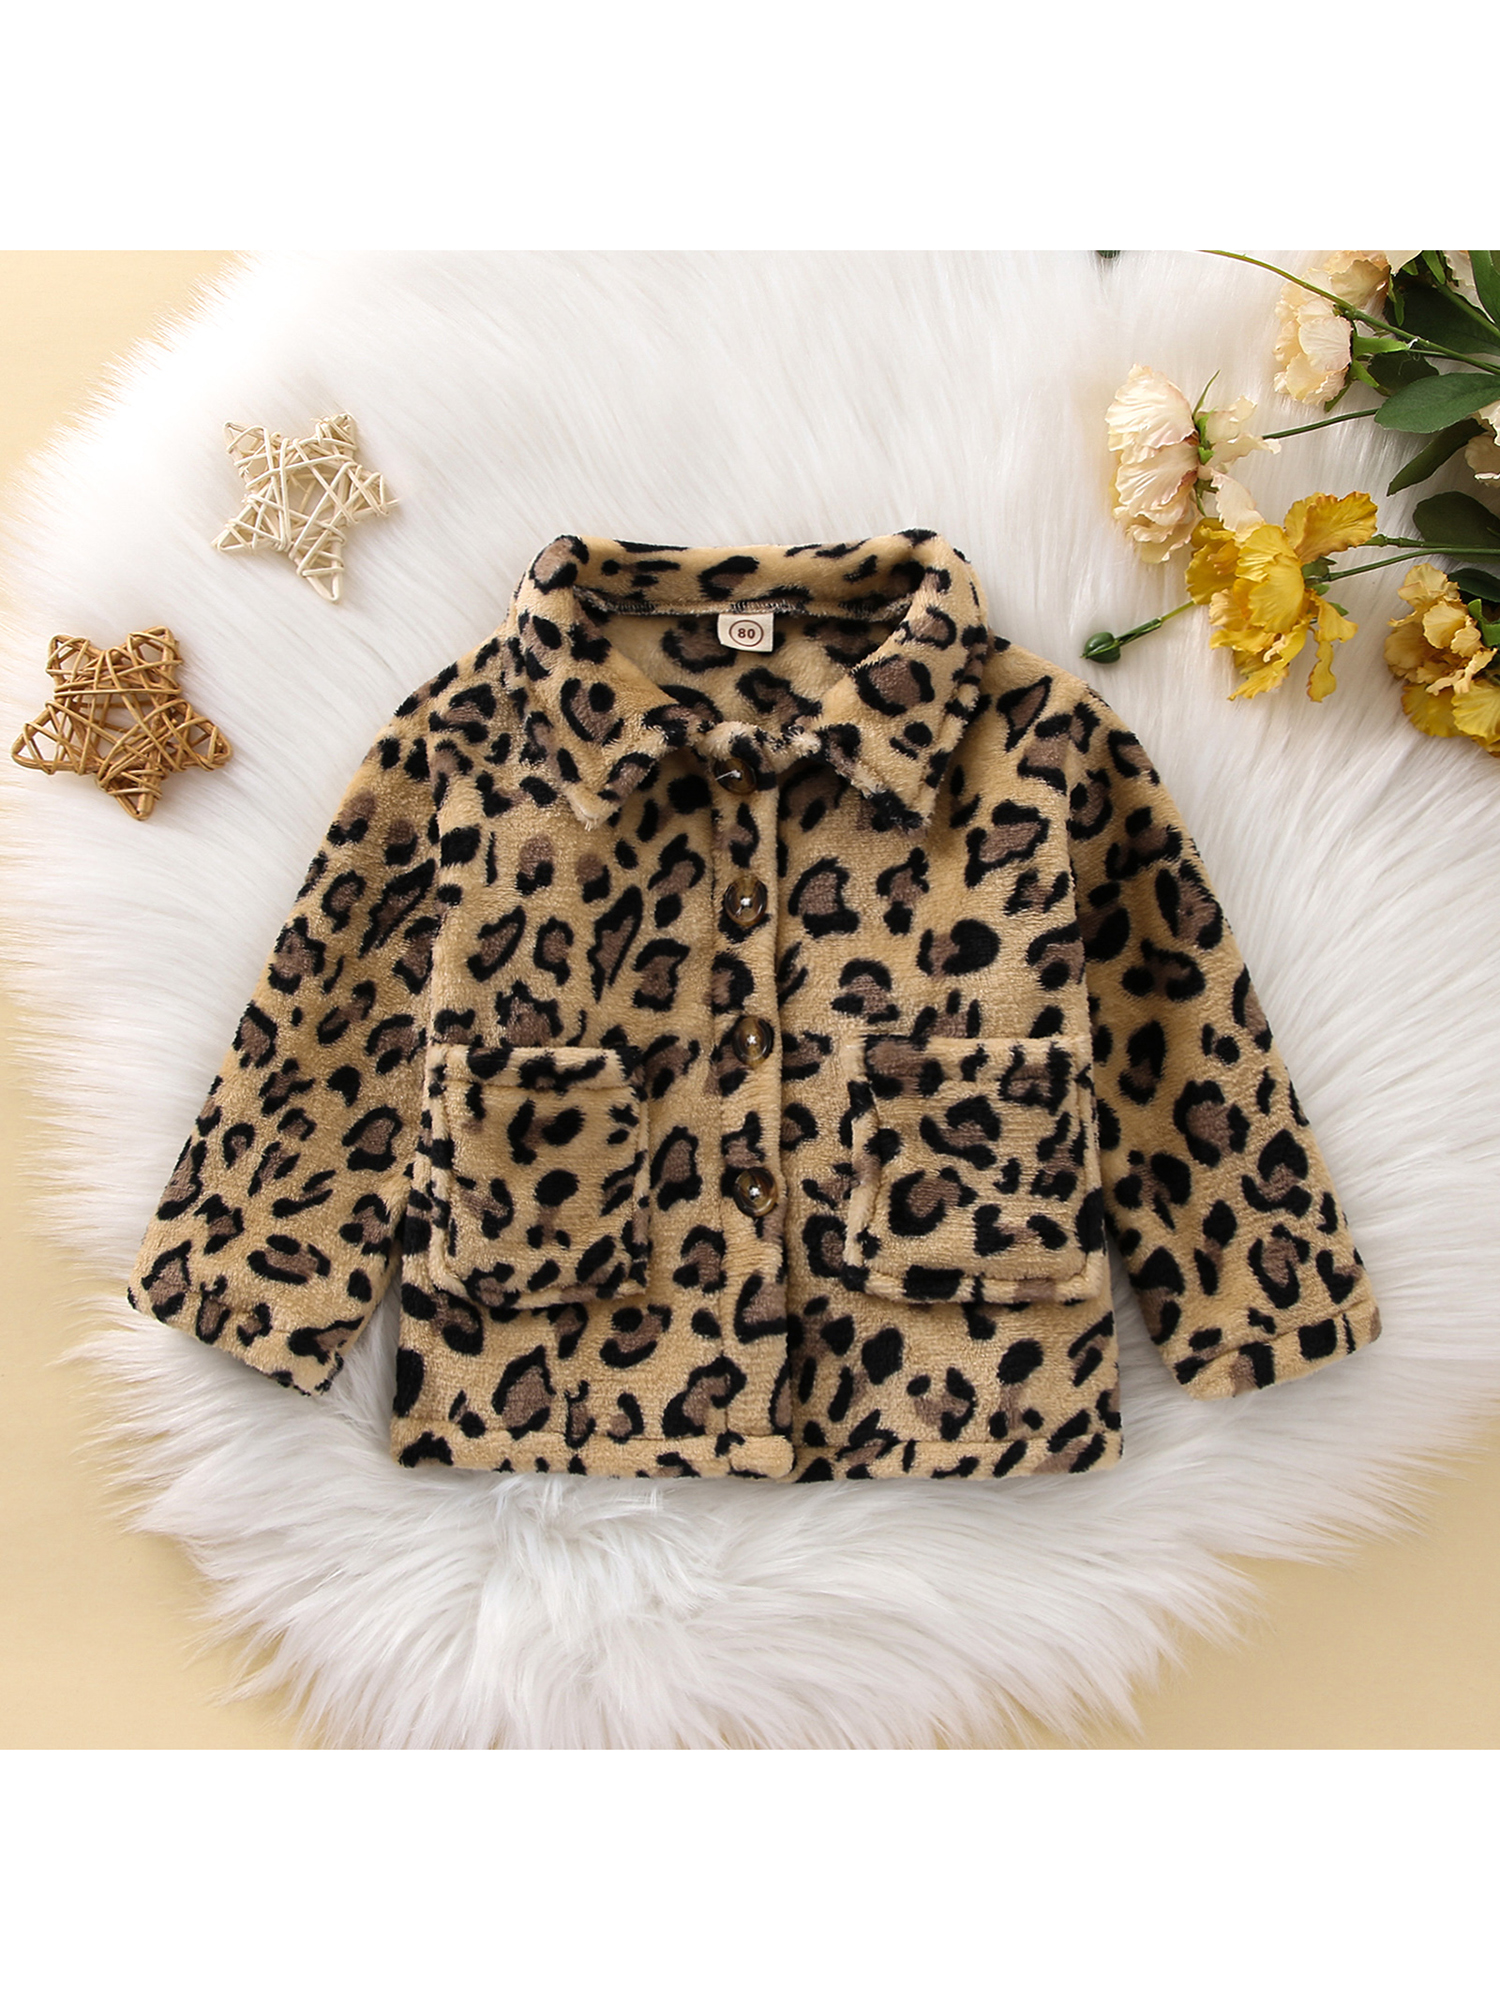 One opening Toddler Baby Winter Jacket Fashion Long Sleeve Leopard Print Button Down Plush Coat - image 2 of 9